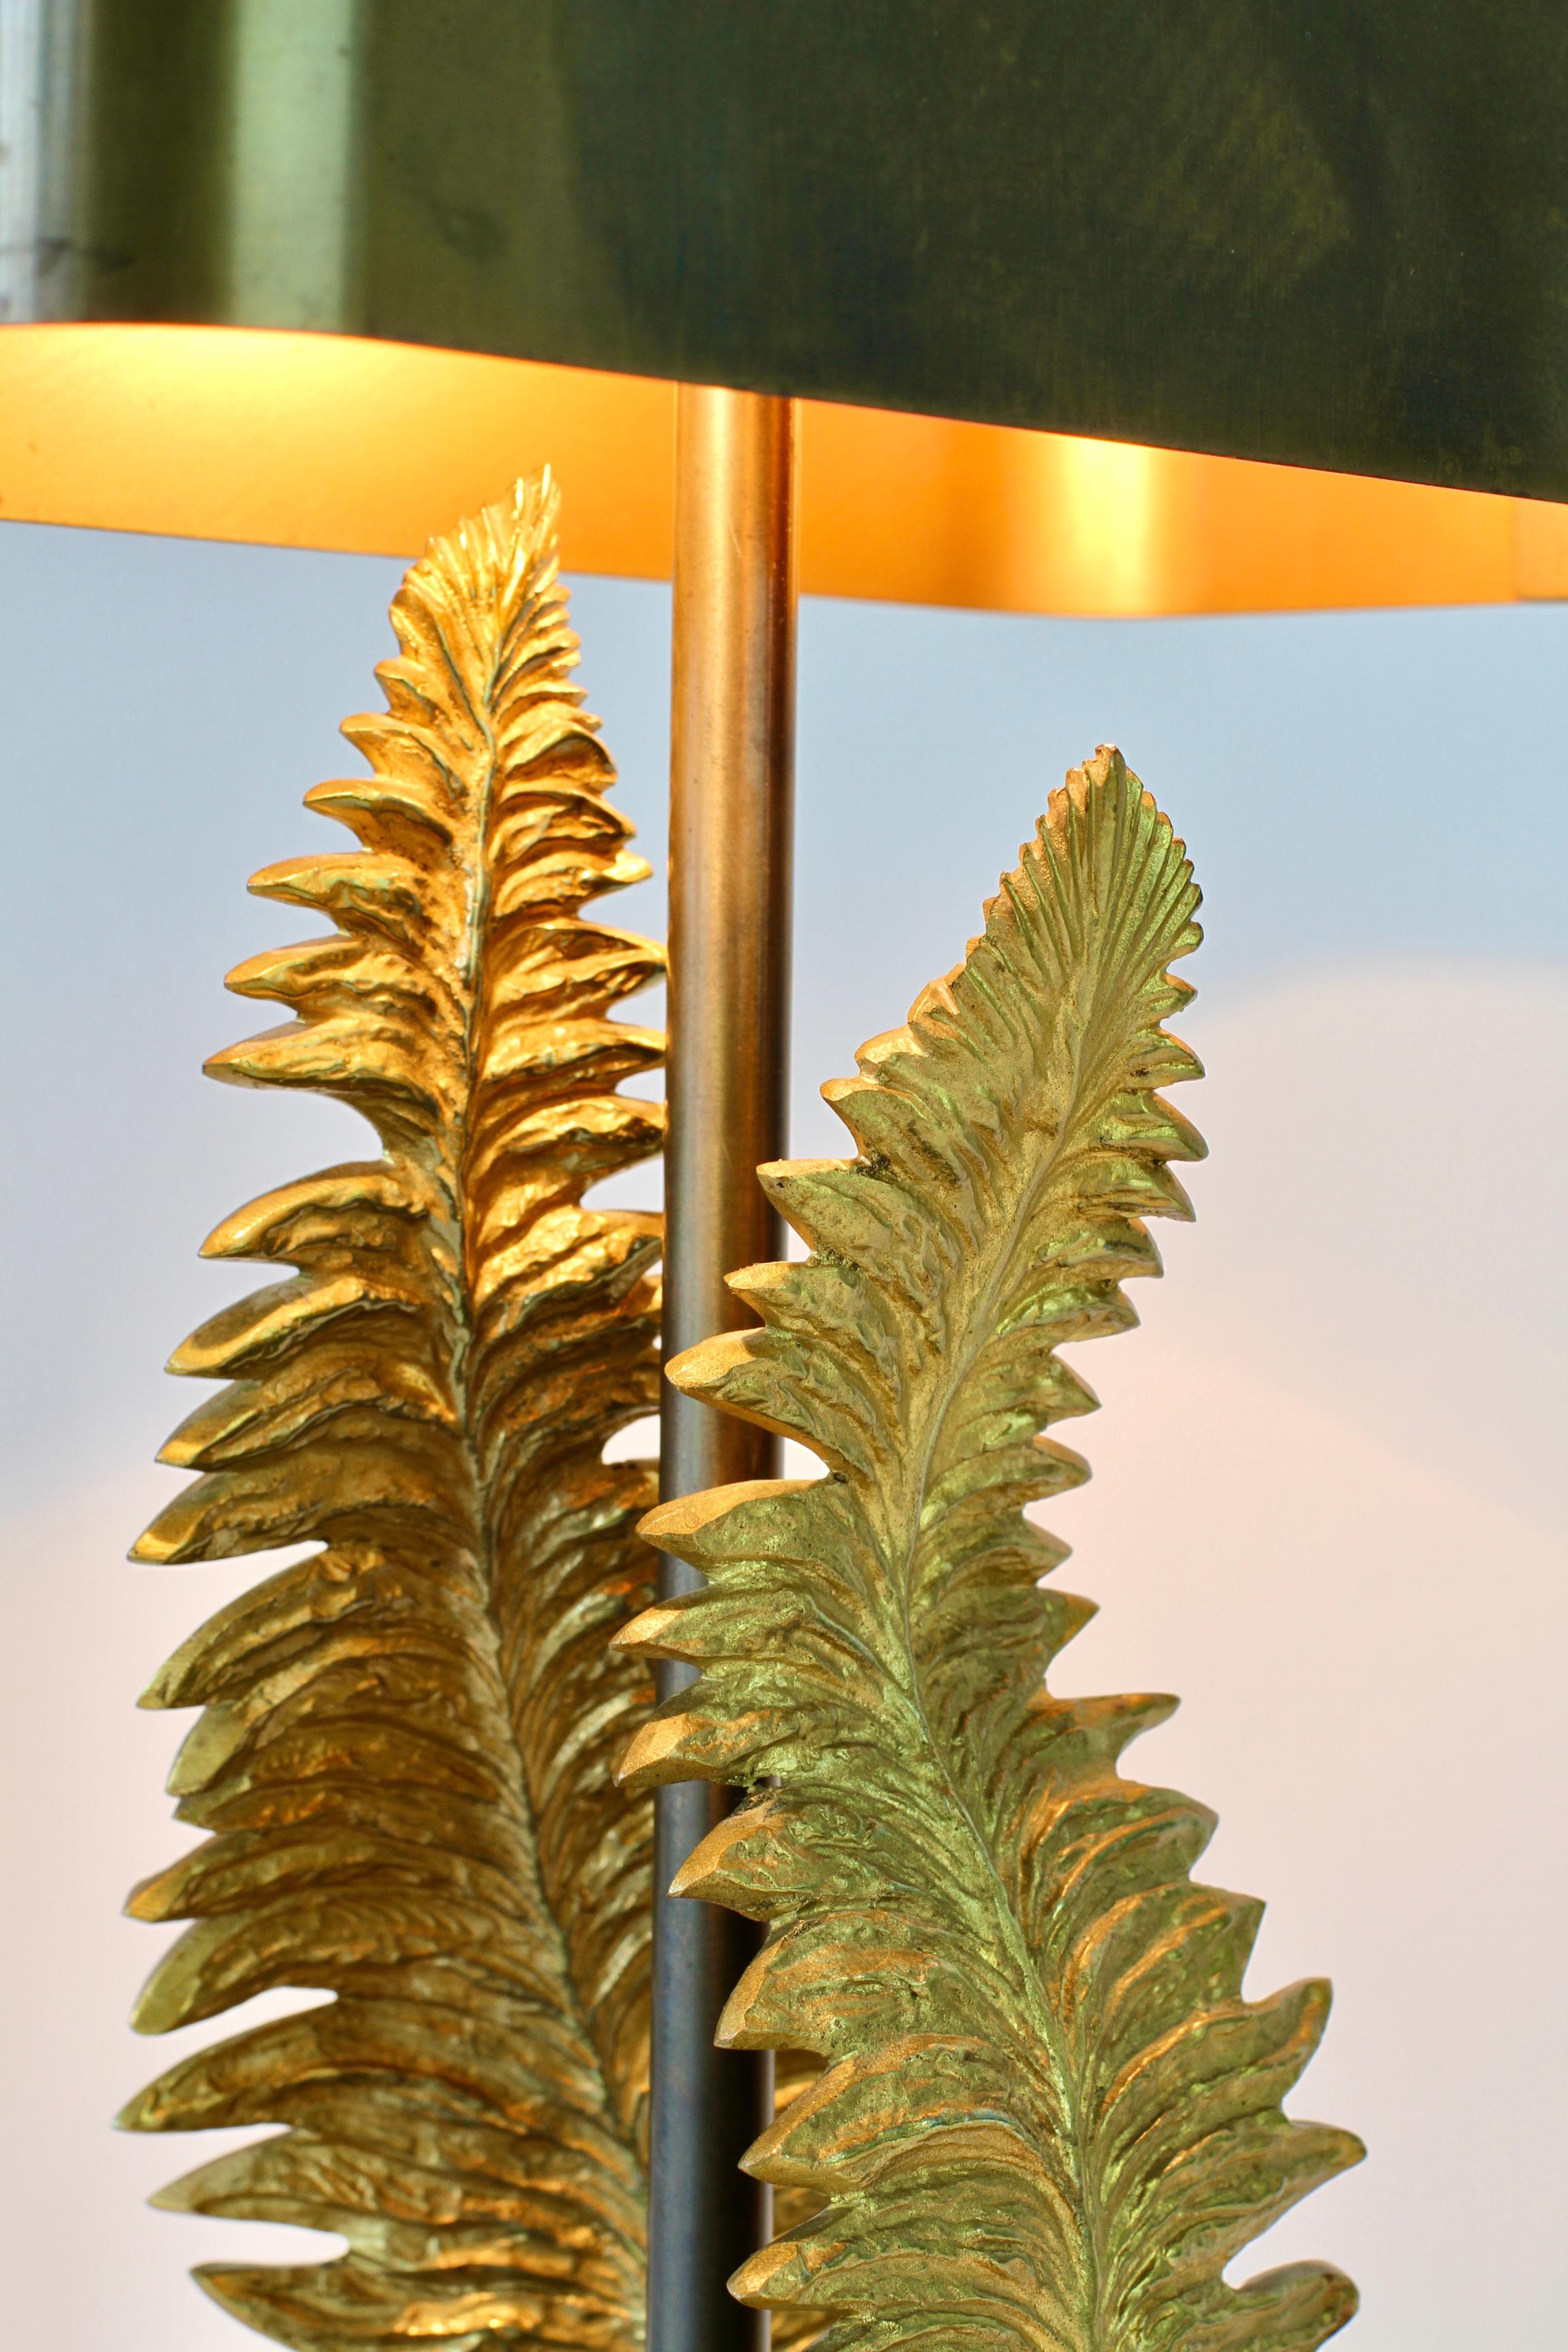 Chrystiane Charles for Maison Charles Signed Brass Fern Table Lamp circa 1960s For Sale 5